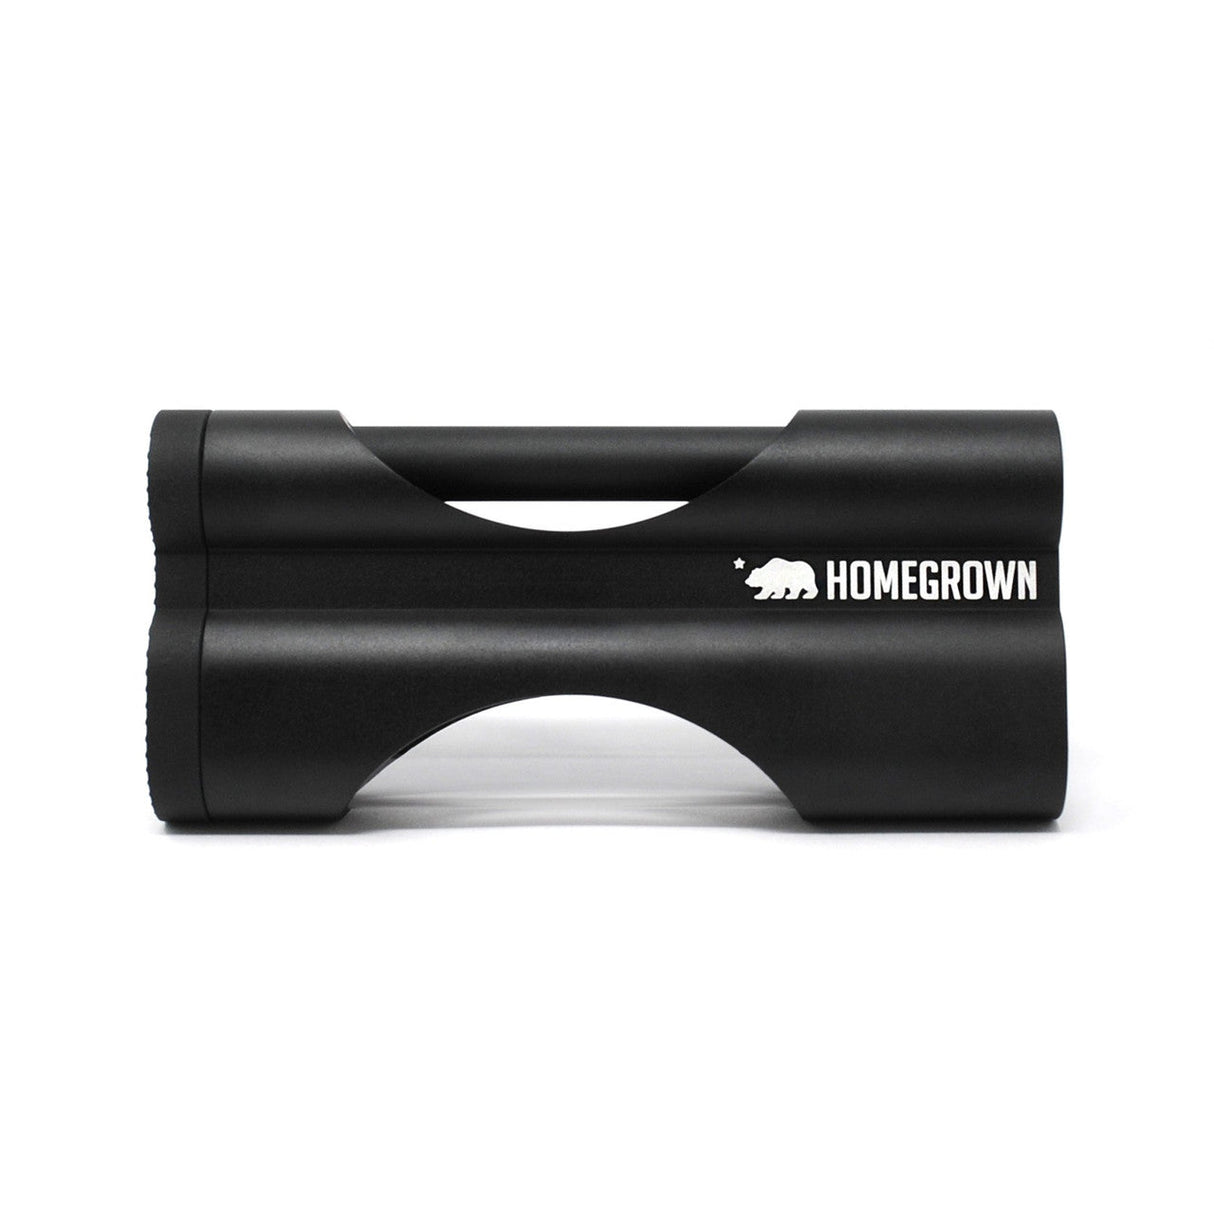 Cali Crusher Homegrown Dugout in Black Aluminum - Compact and Portable with Engraved Logo